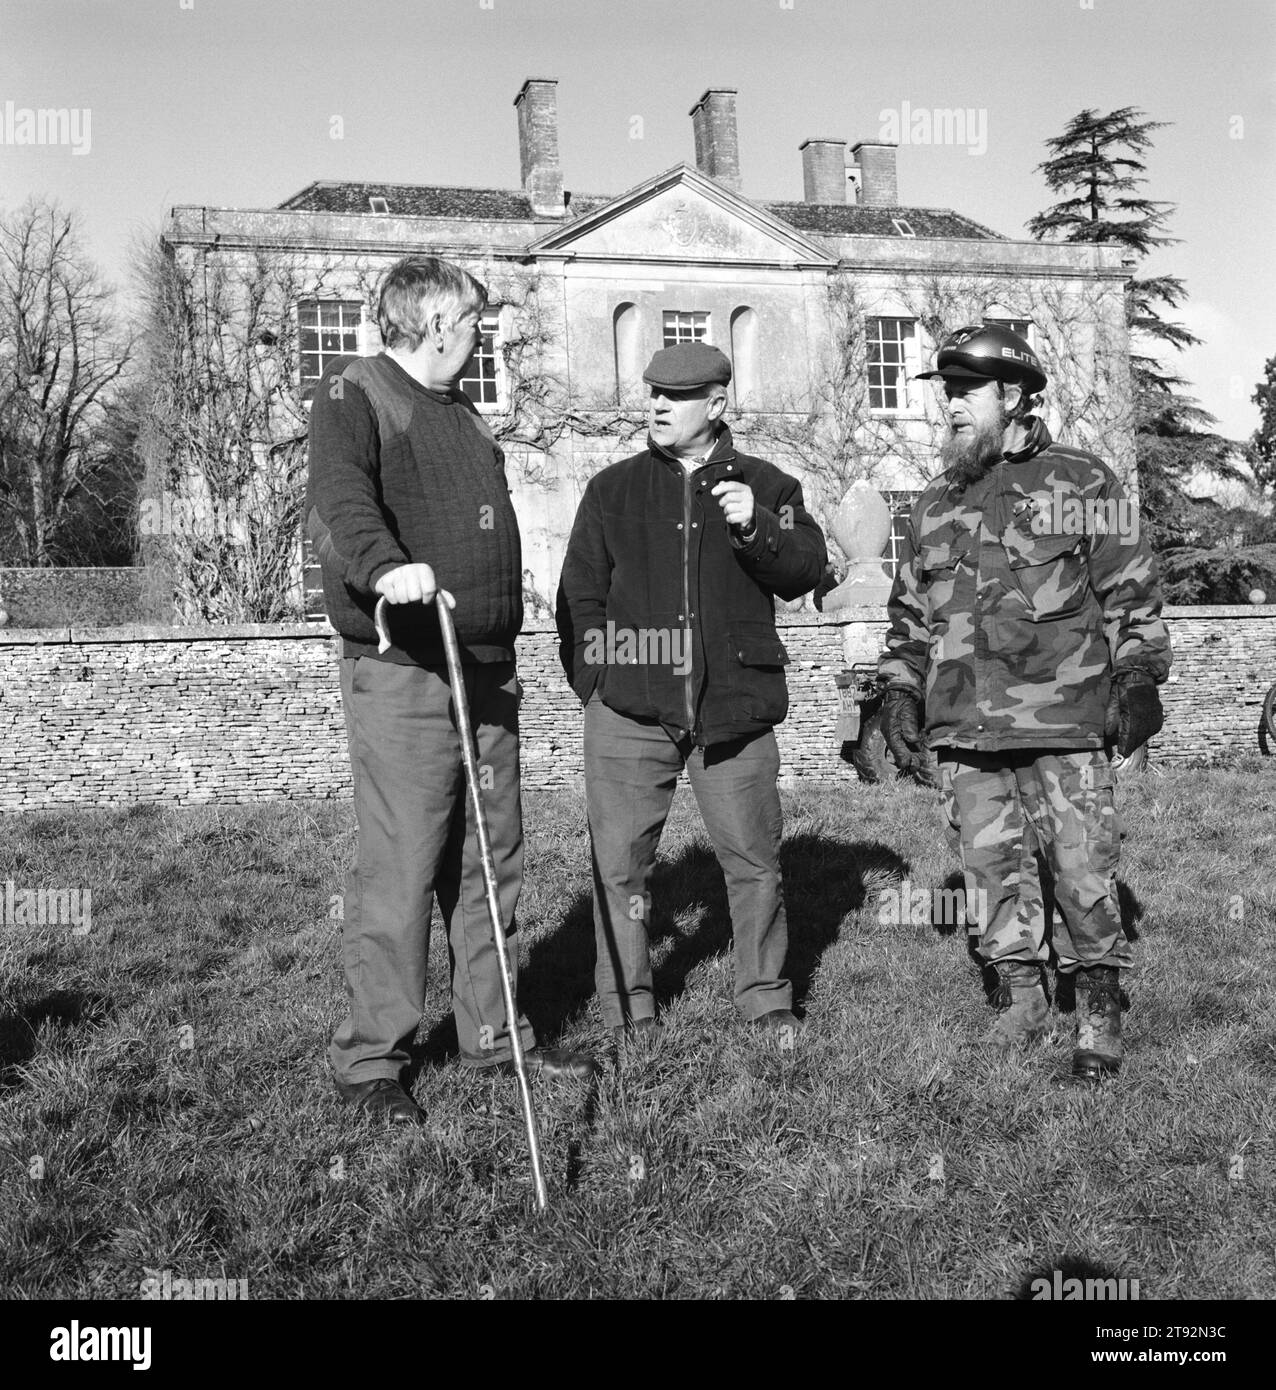 Duke of Beaufort Hunt. Foot followers discuss the coming days hunting. Easton Grey House, Easton Grey, Wiltshire 2002 2000s UK England HOMER SYKES Stock Photo